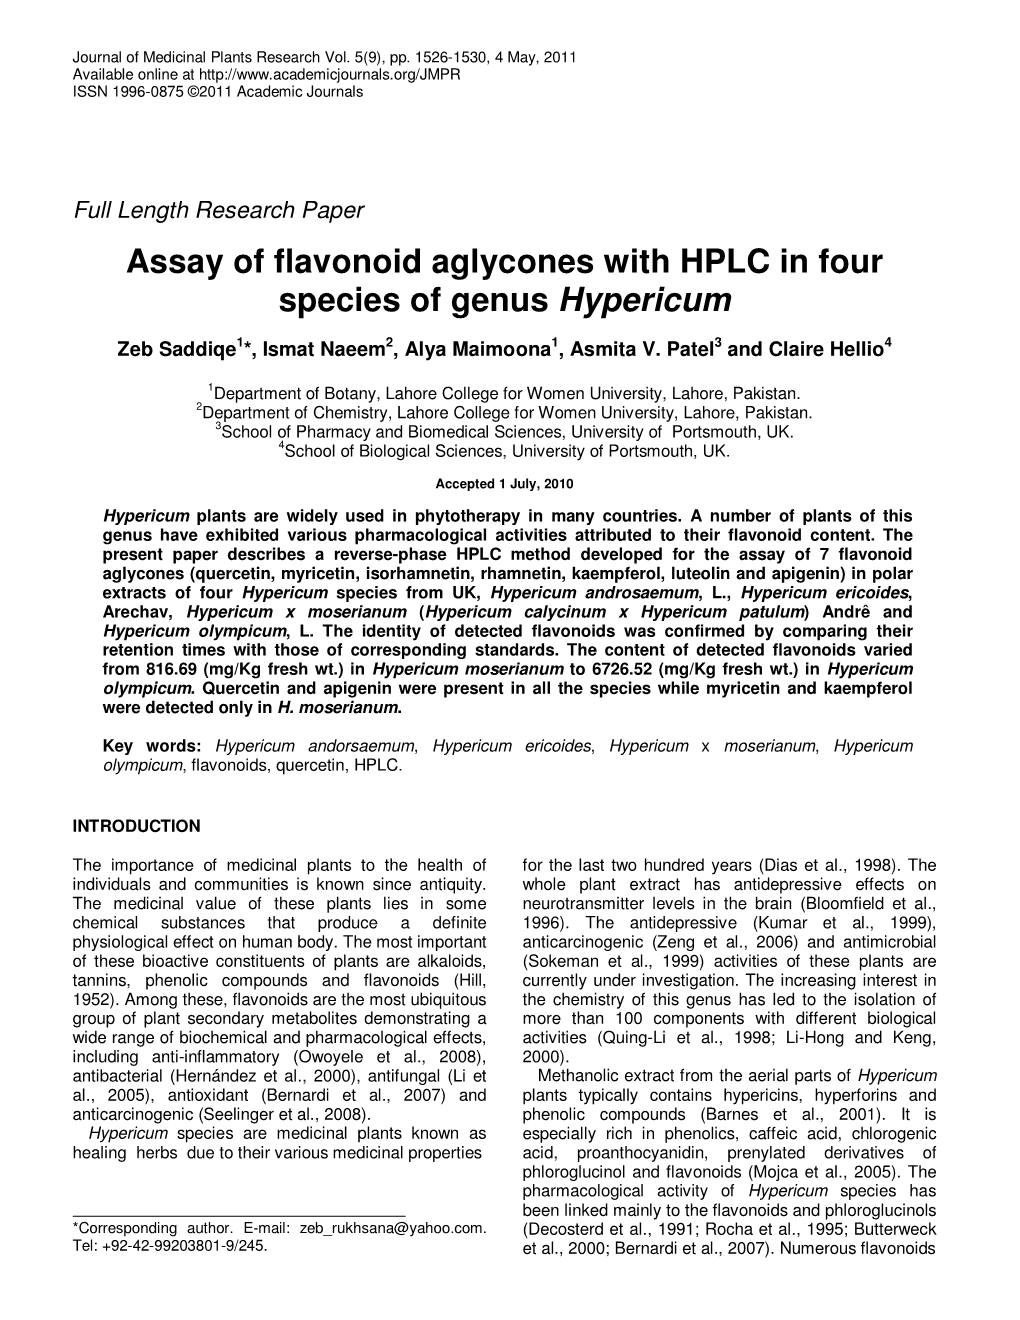 Assay of Flavonoid Aglycones with HPLC in Four Species of Genus Hypericum